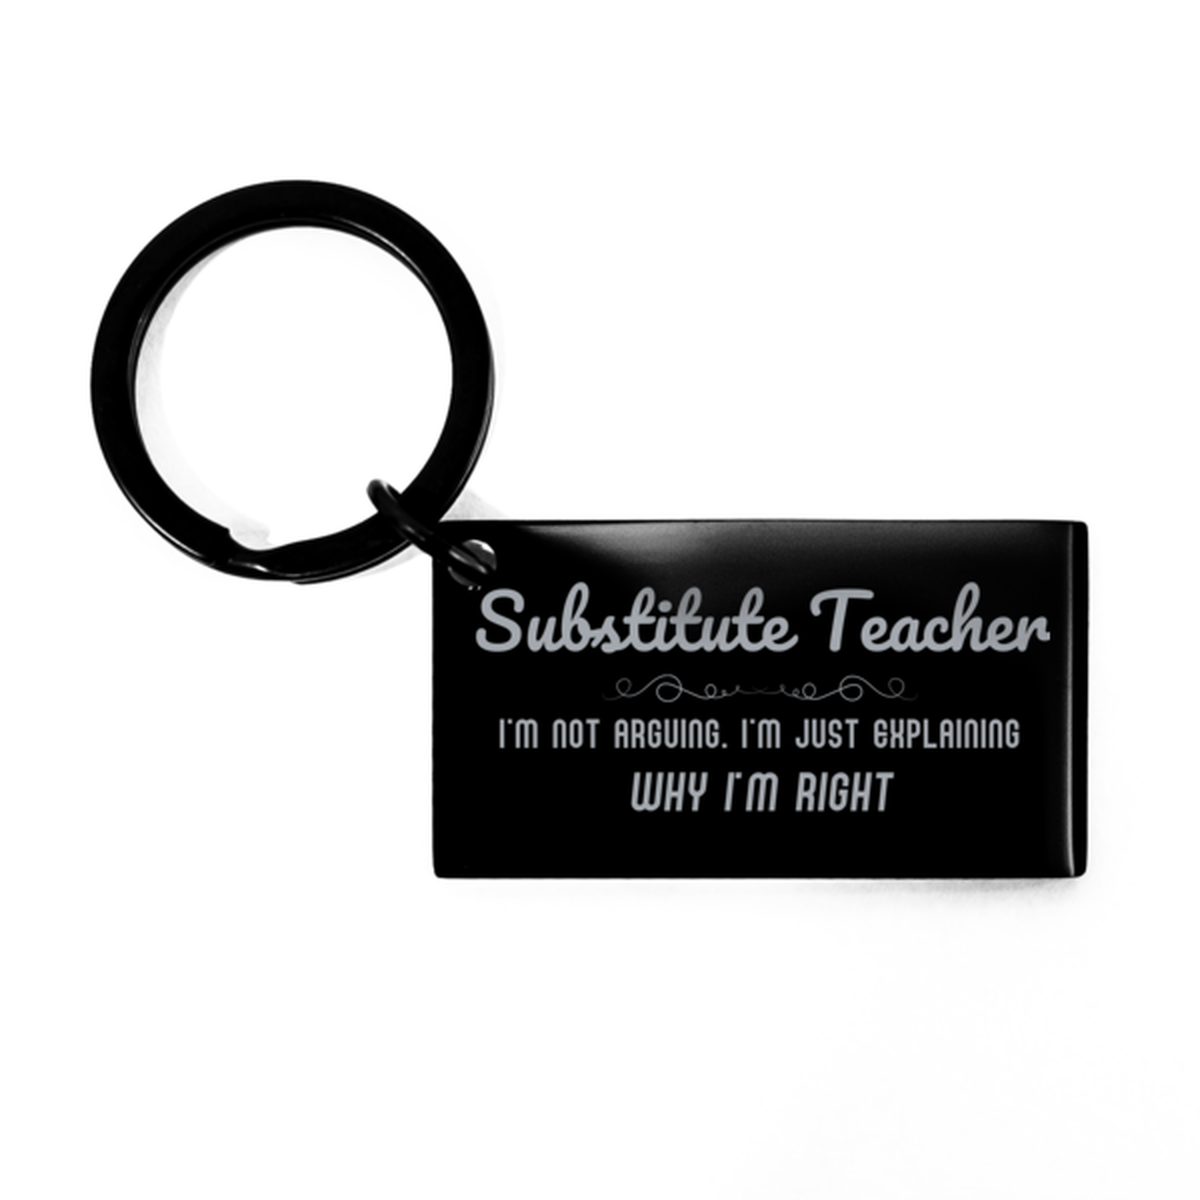 Substitute Teacher I'm not Arguing. I'm Just Explaining Why I'm RIGHT Keychain, Funny Saying Quote Substitute Teacher Gifts For Substitute Teacher Graduation Birthday Christmas Gifts for Men Women Coworker